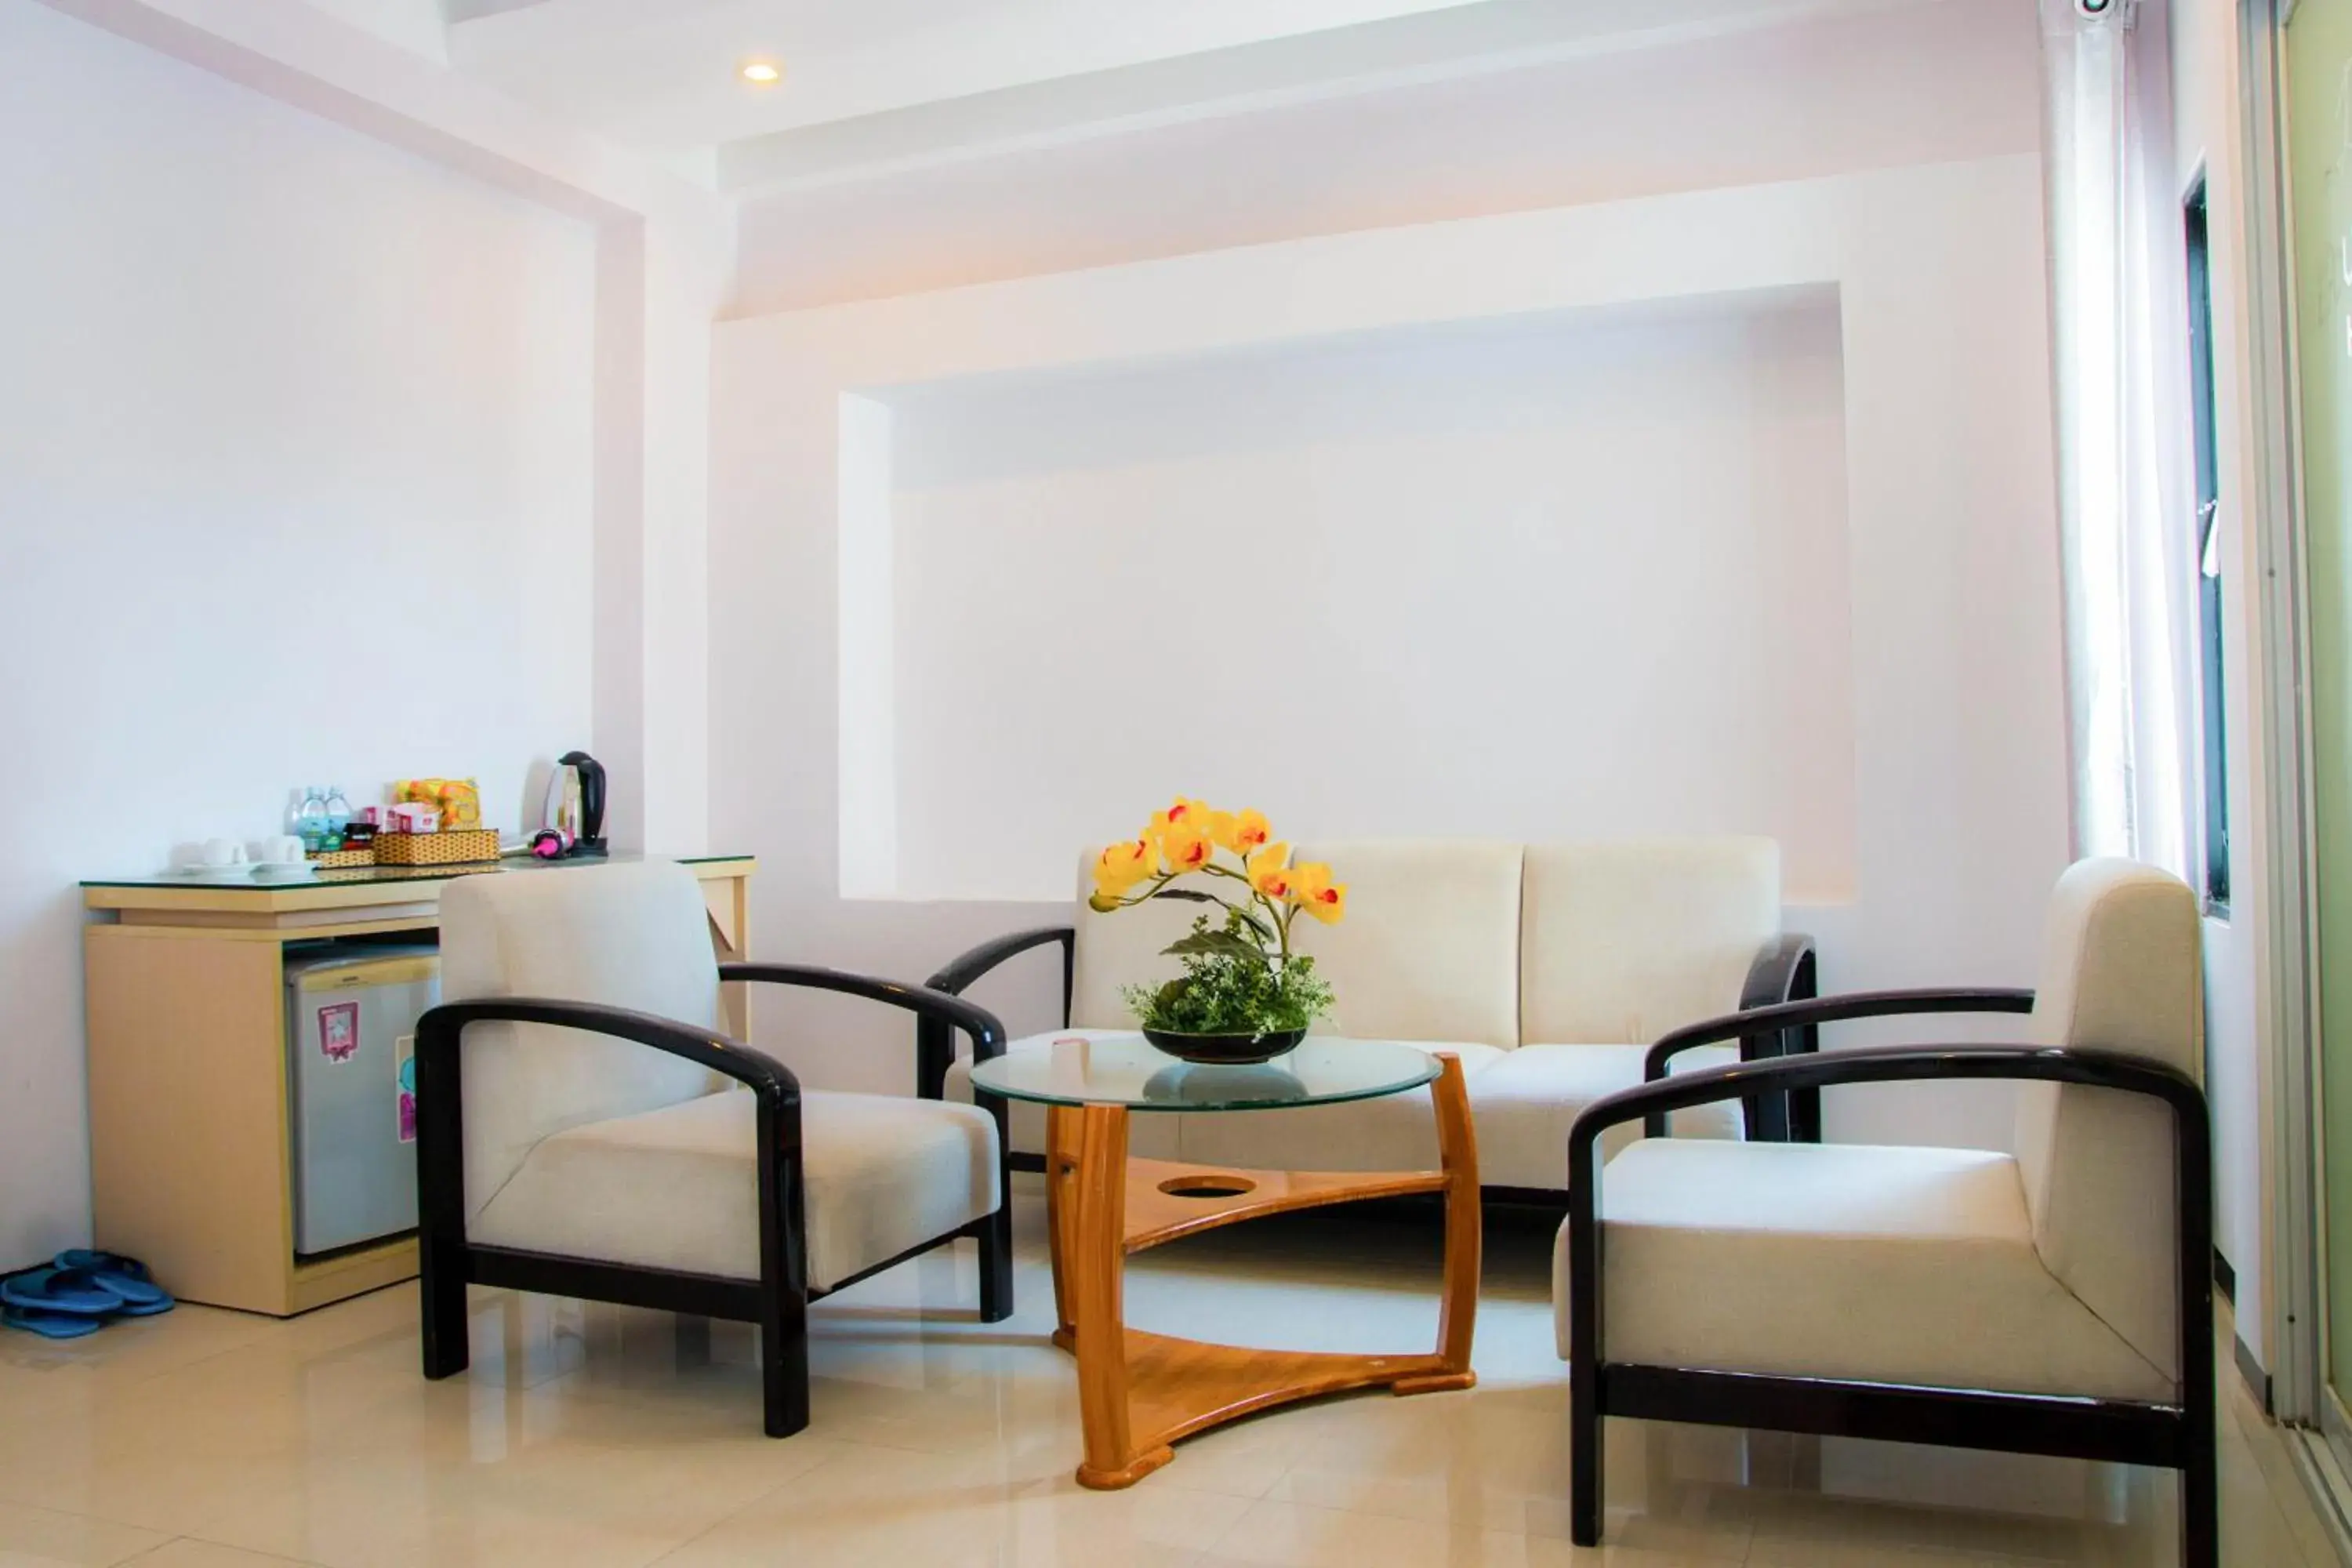 Seating Area in Le Duong Hotel